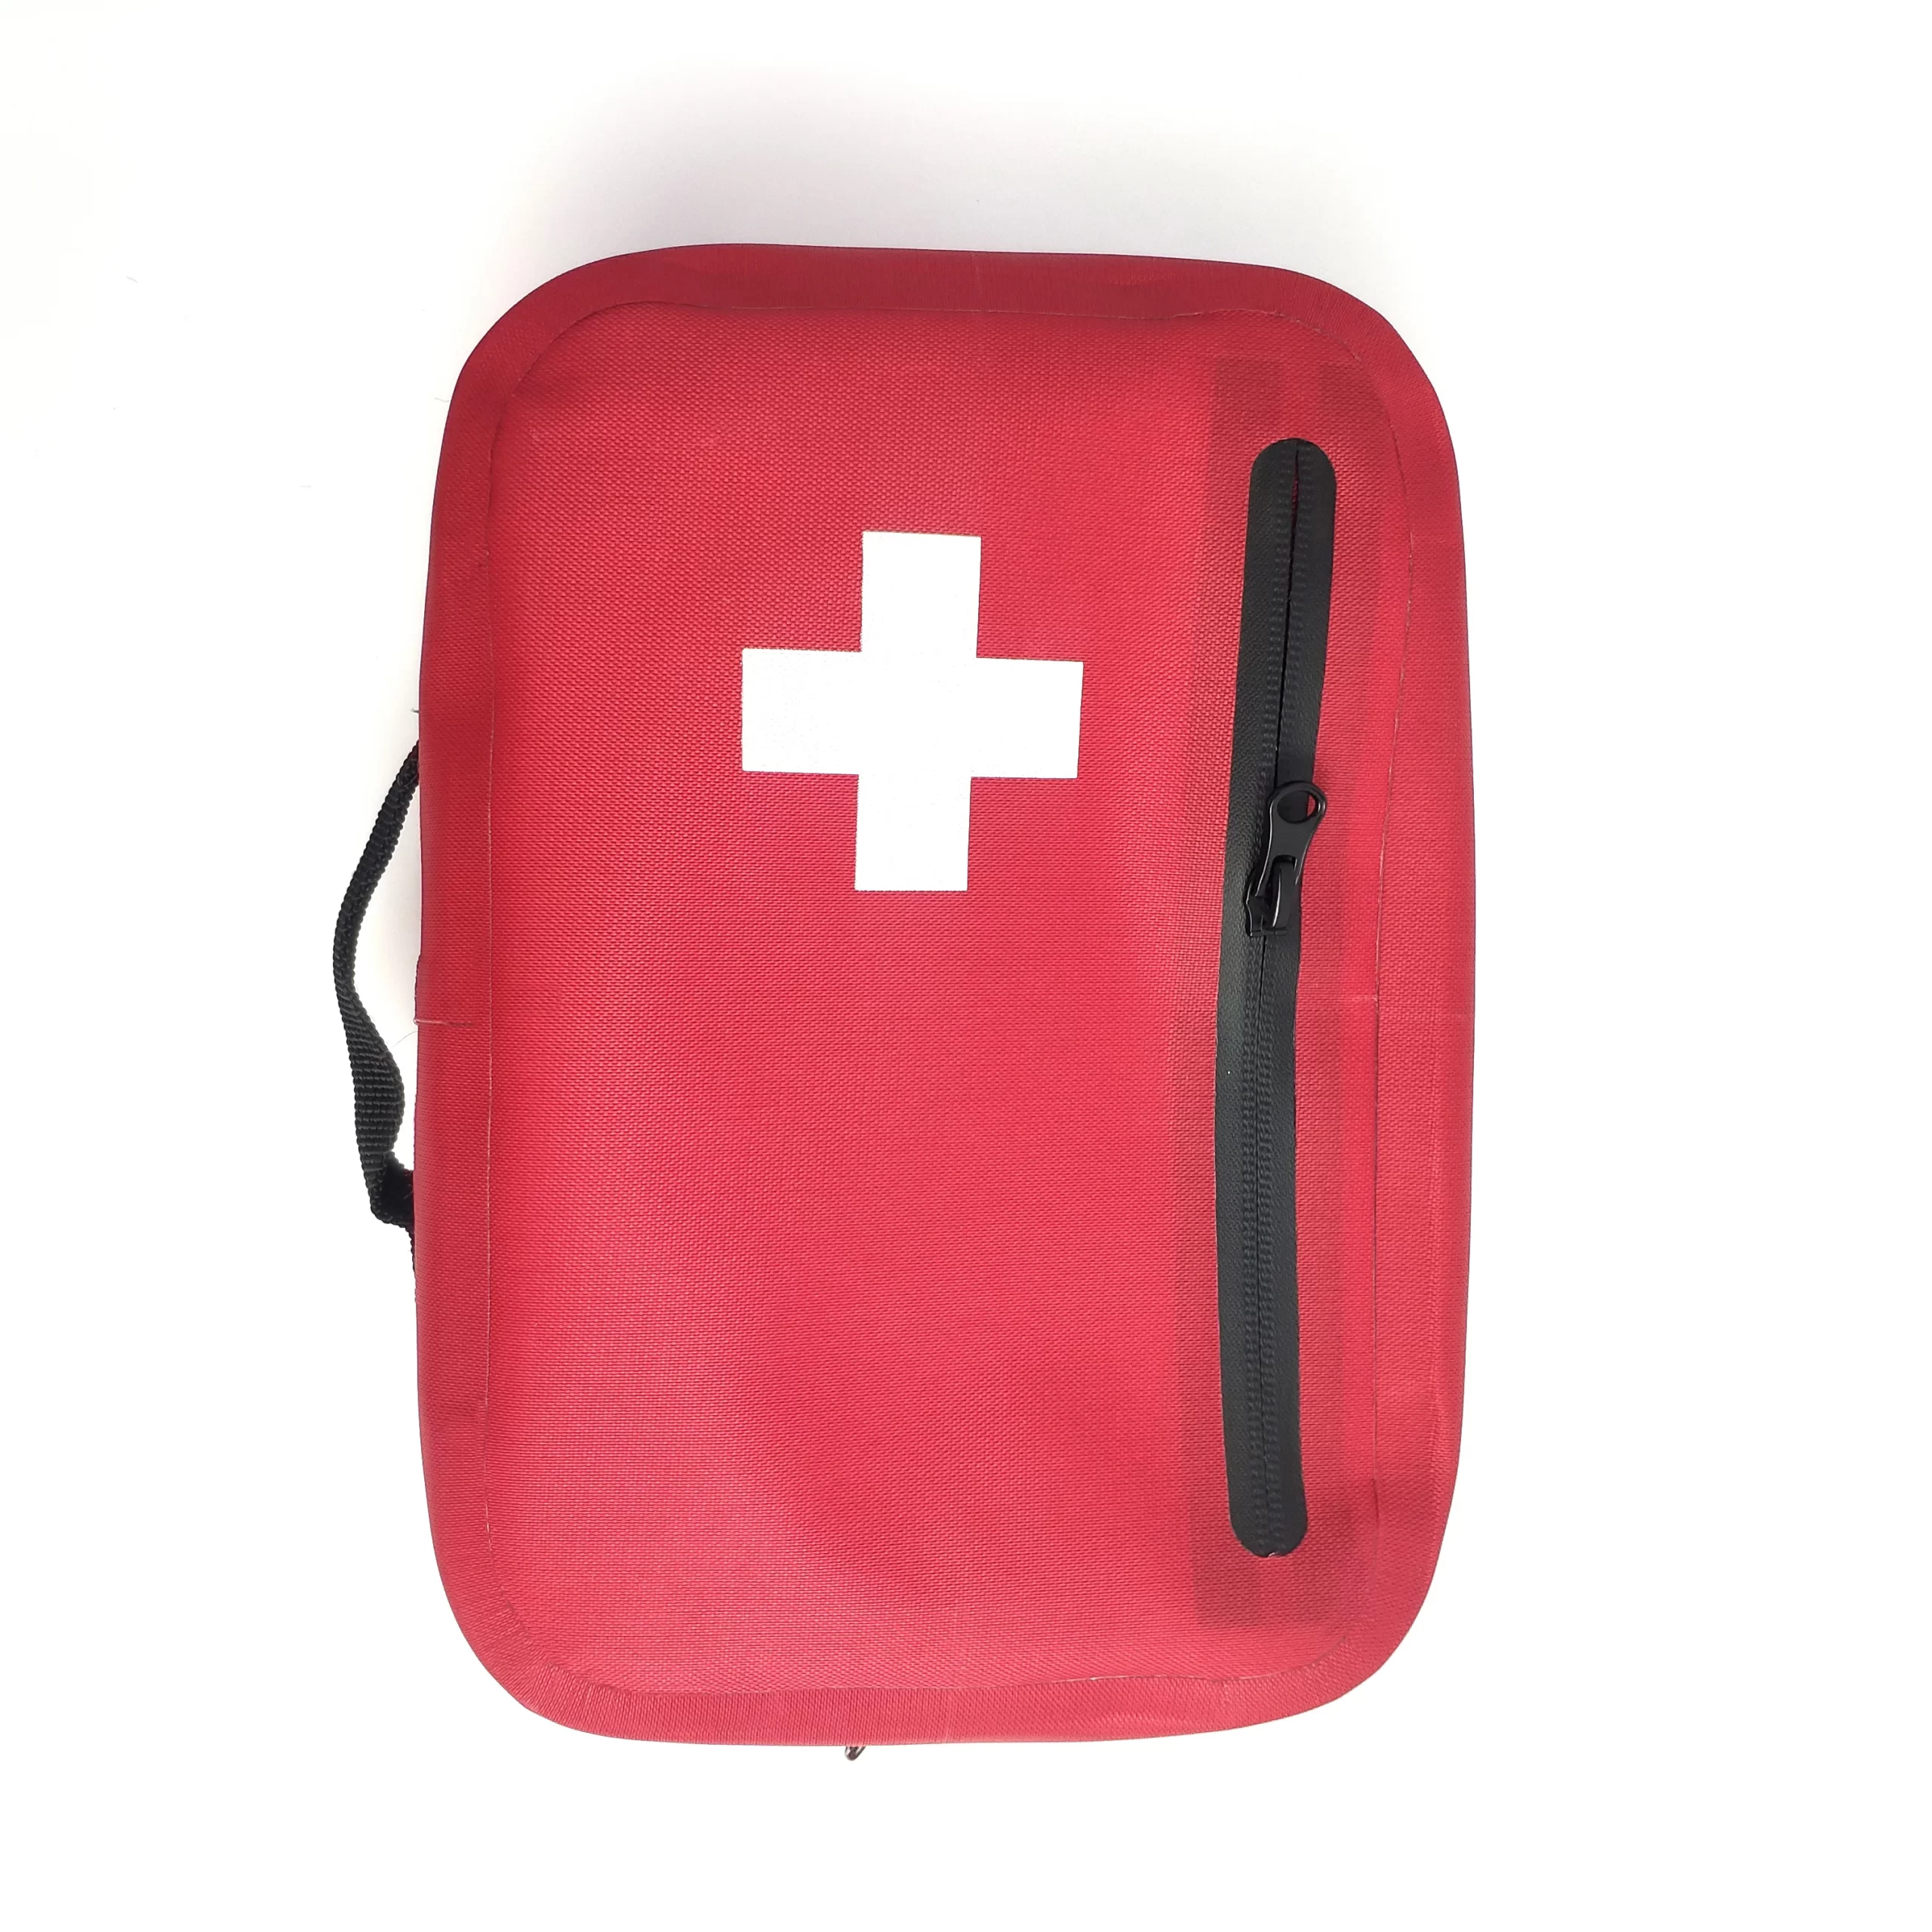 The Multifunctional Portable Waterproof Medical Kit Mini First Aid Kit for  Car - China Waterproof Medical Kit, First Aid Kit Bags